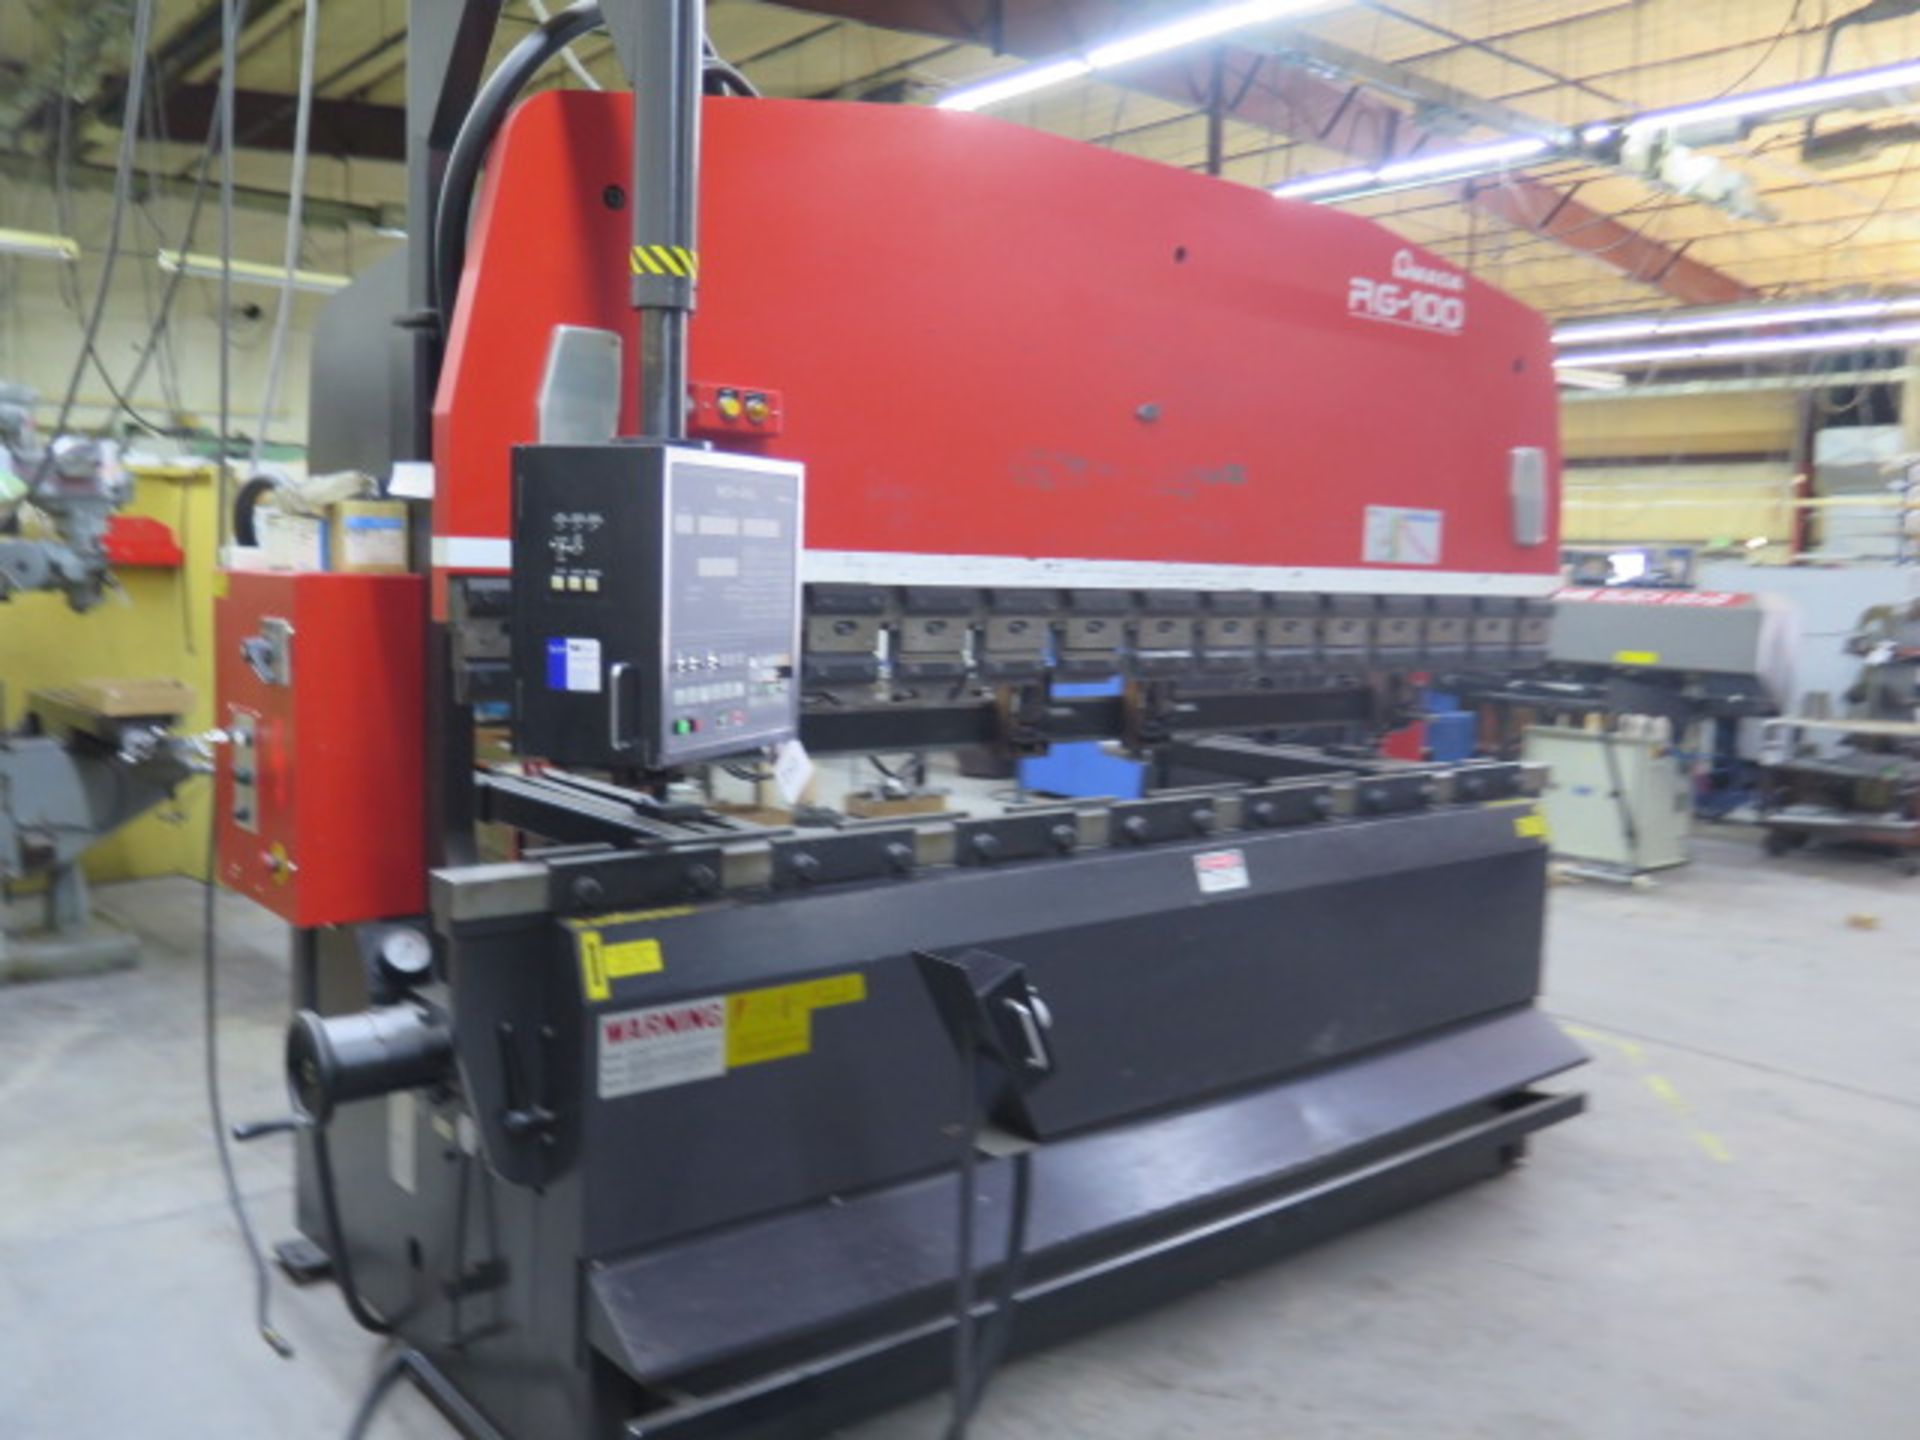 Amada RG100 100 Ton x 10’ CNC Press Brake s/n 105240 w/ NC9-EX II 3 AXIS Controls, SOLD AS IS - Image 2 of 20